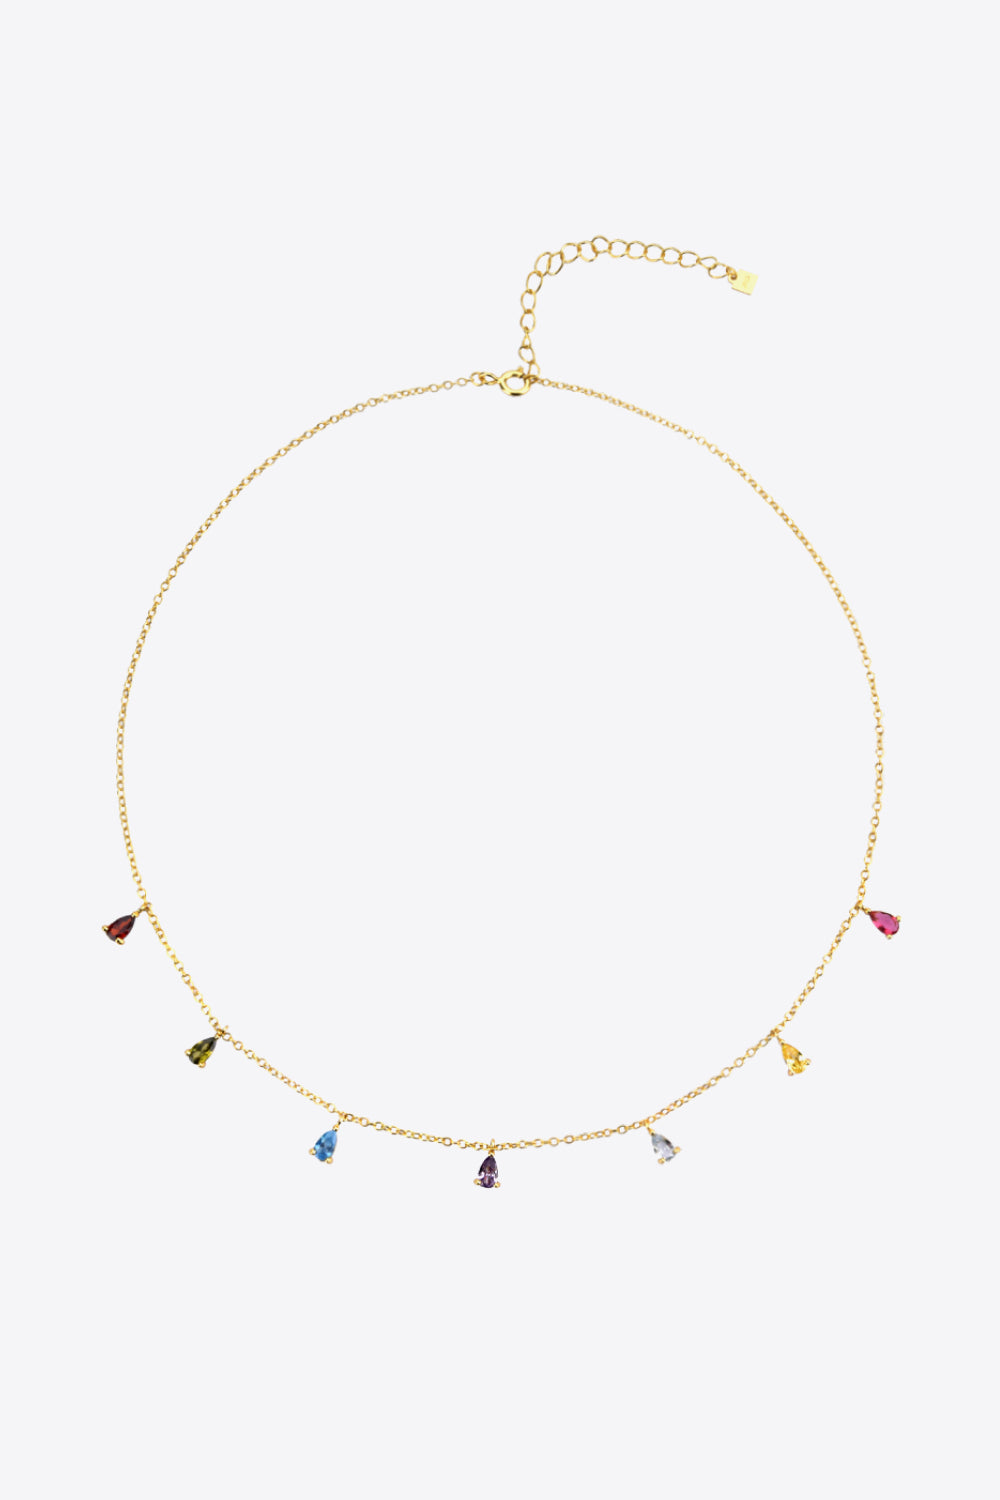 BEAUTIFUL rainbow of colors on this necklace made for a Queenj